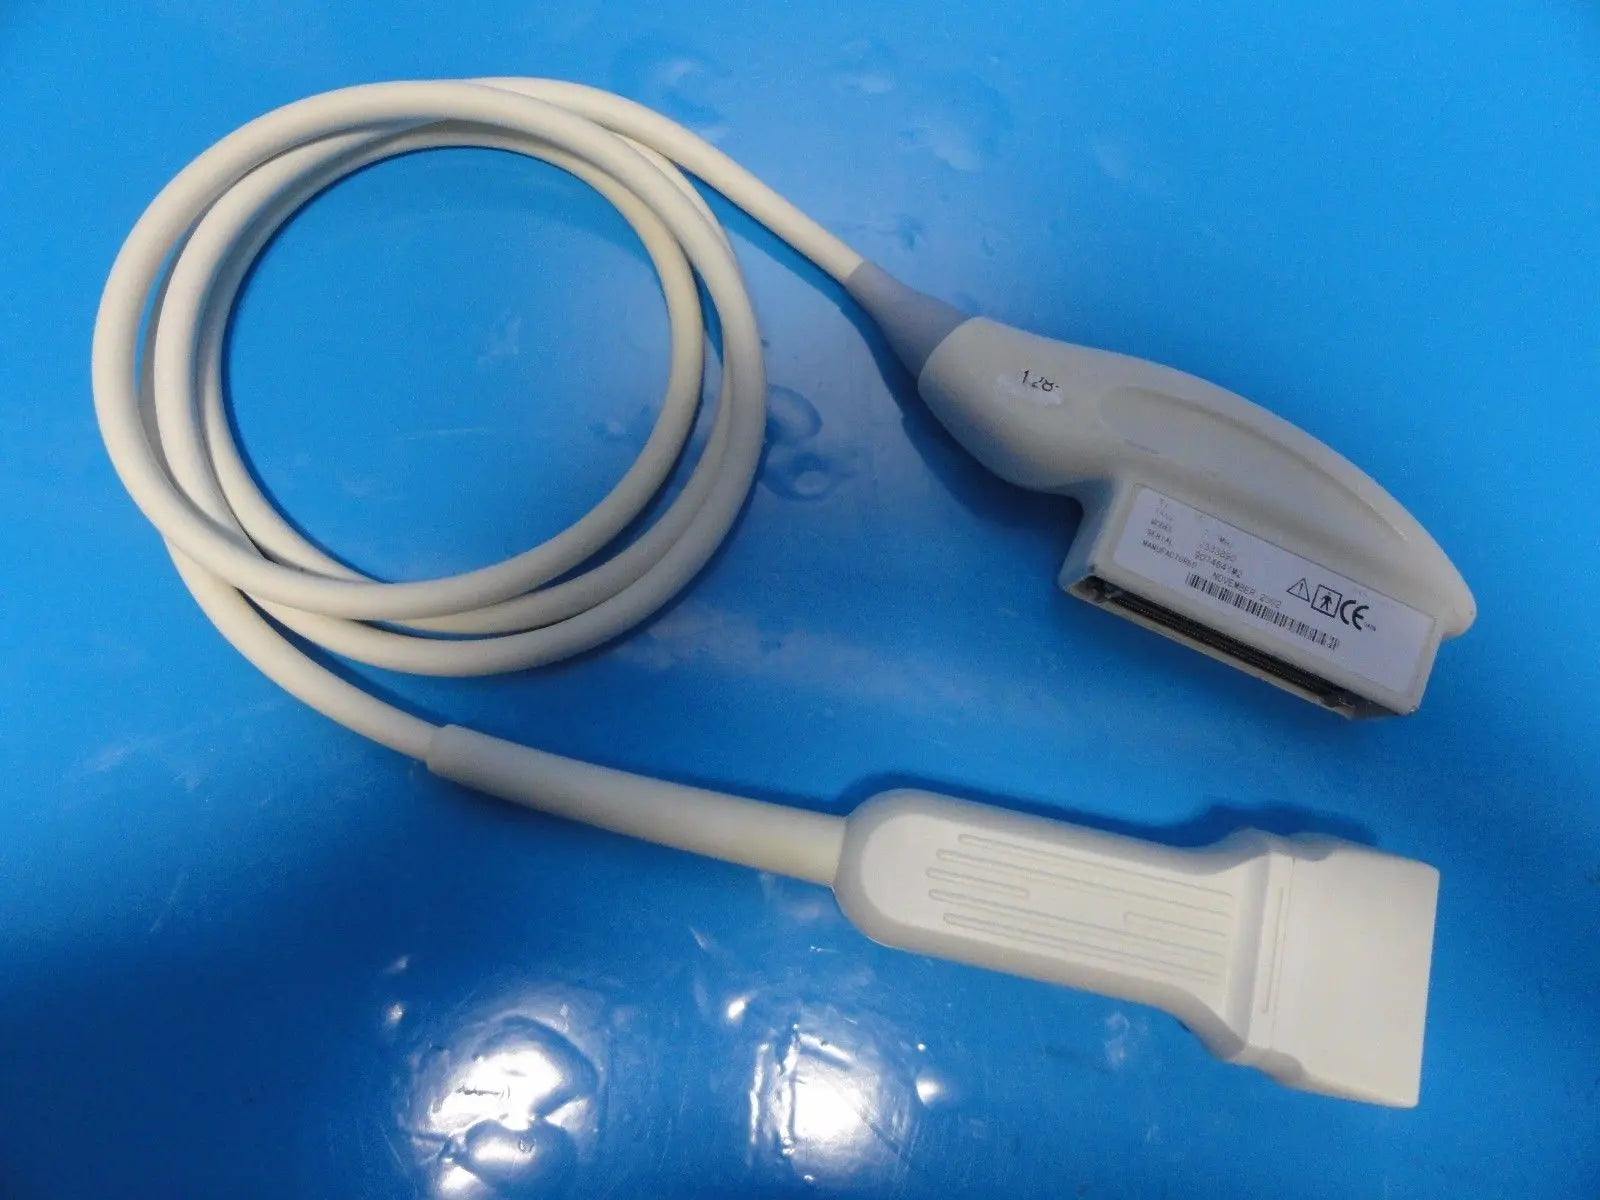 GE 10LB-RS P/N 2333890 Linear Array 7.0 MHz Transducer Ultrasound Probe ~13791 DIAGNOSTIC ULTRASOUND MACHINES FOR SALE